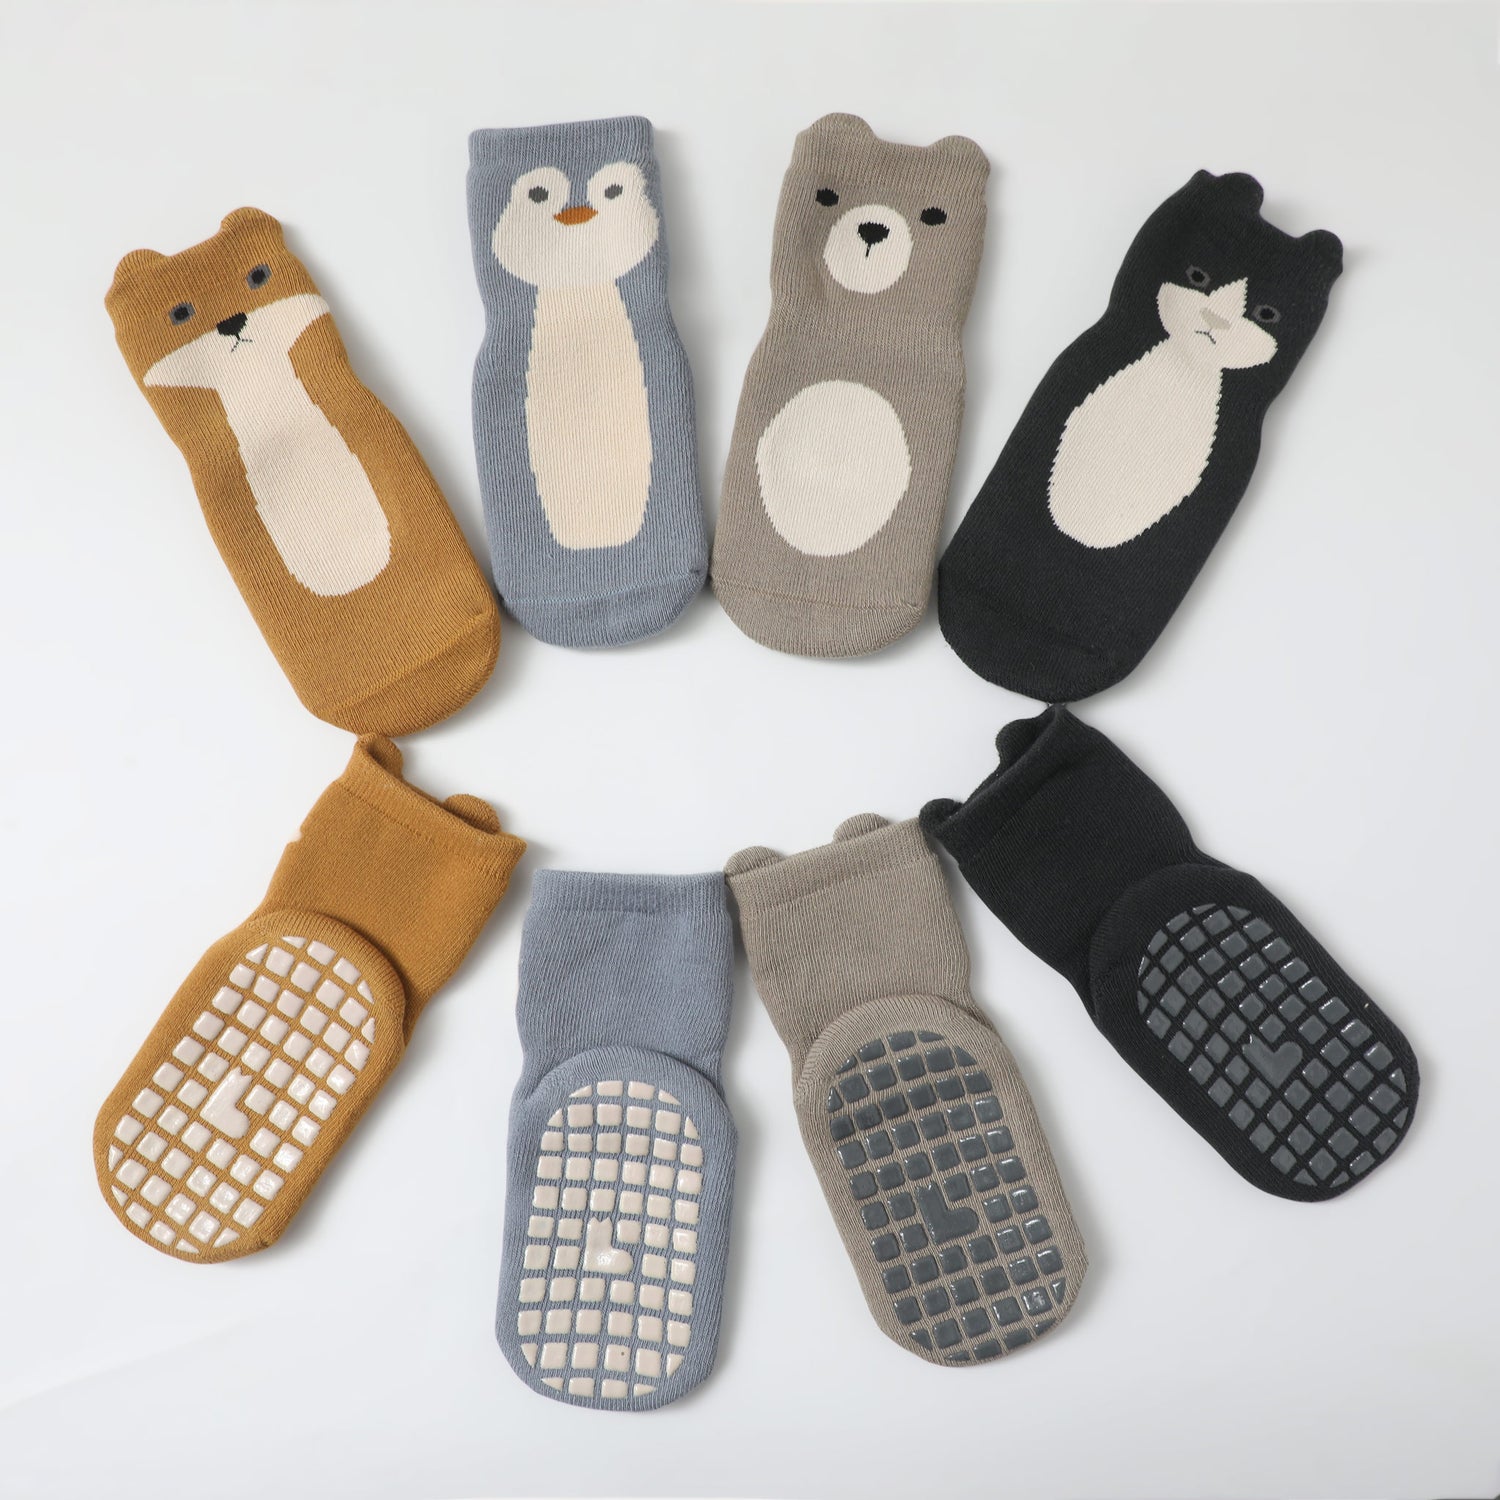 Stay-on baby and toddler non-slip socks in vibrant colors